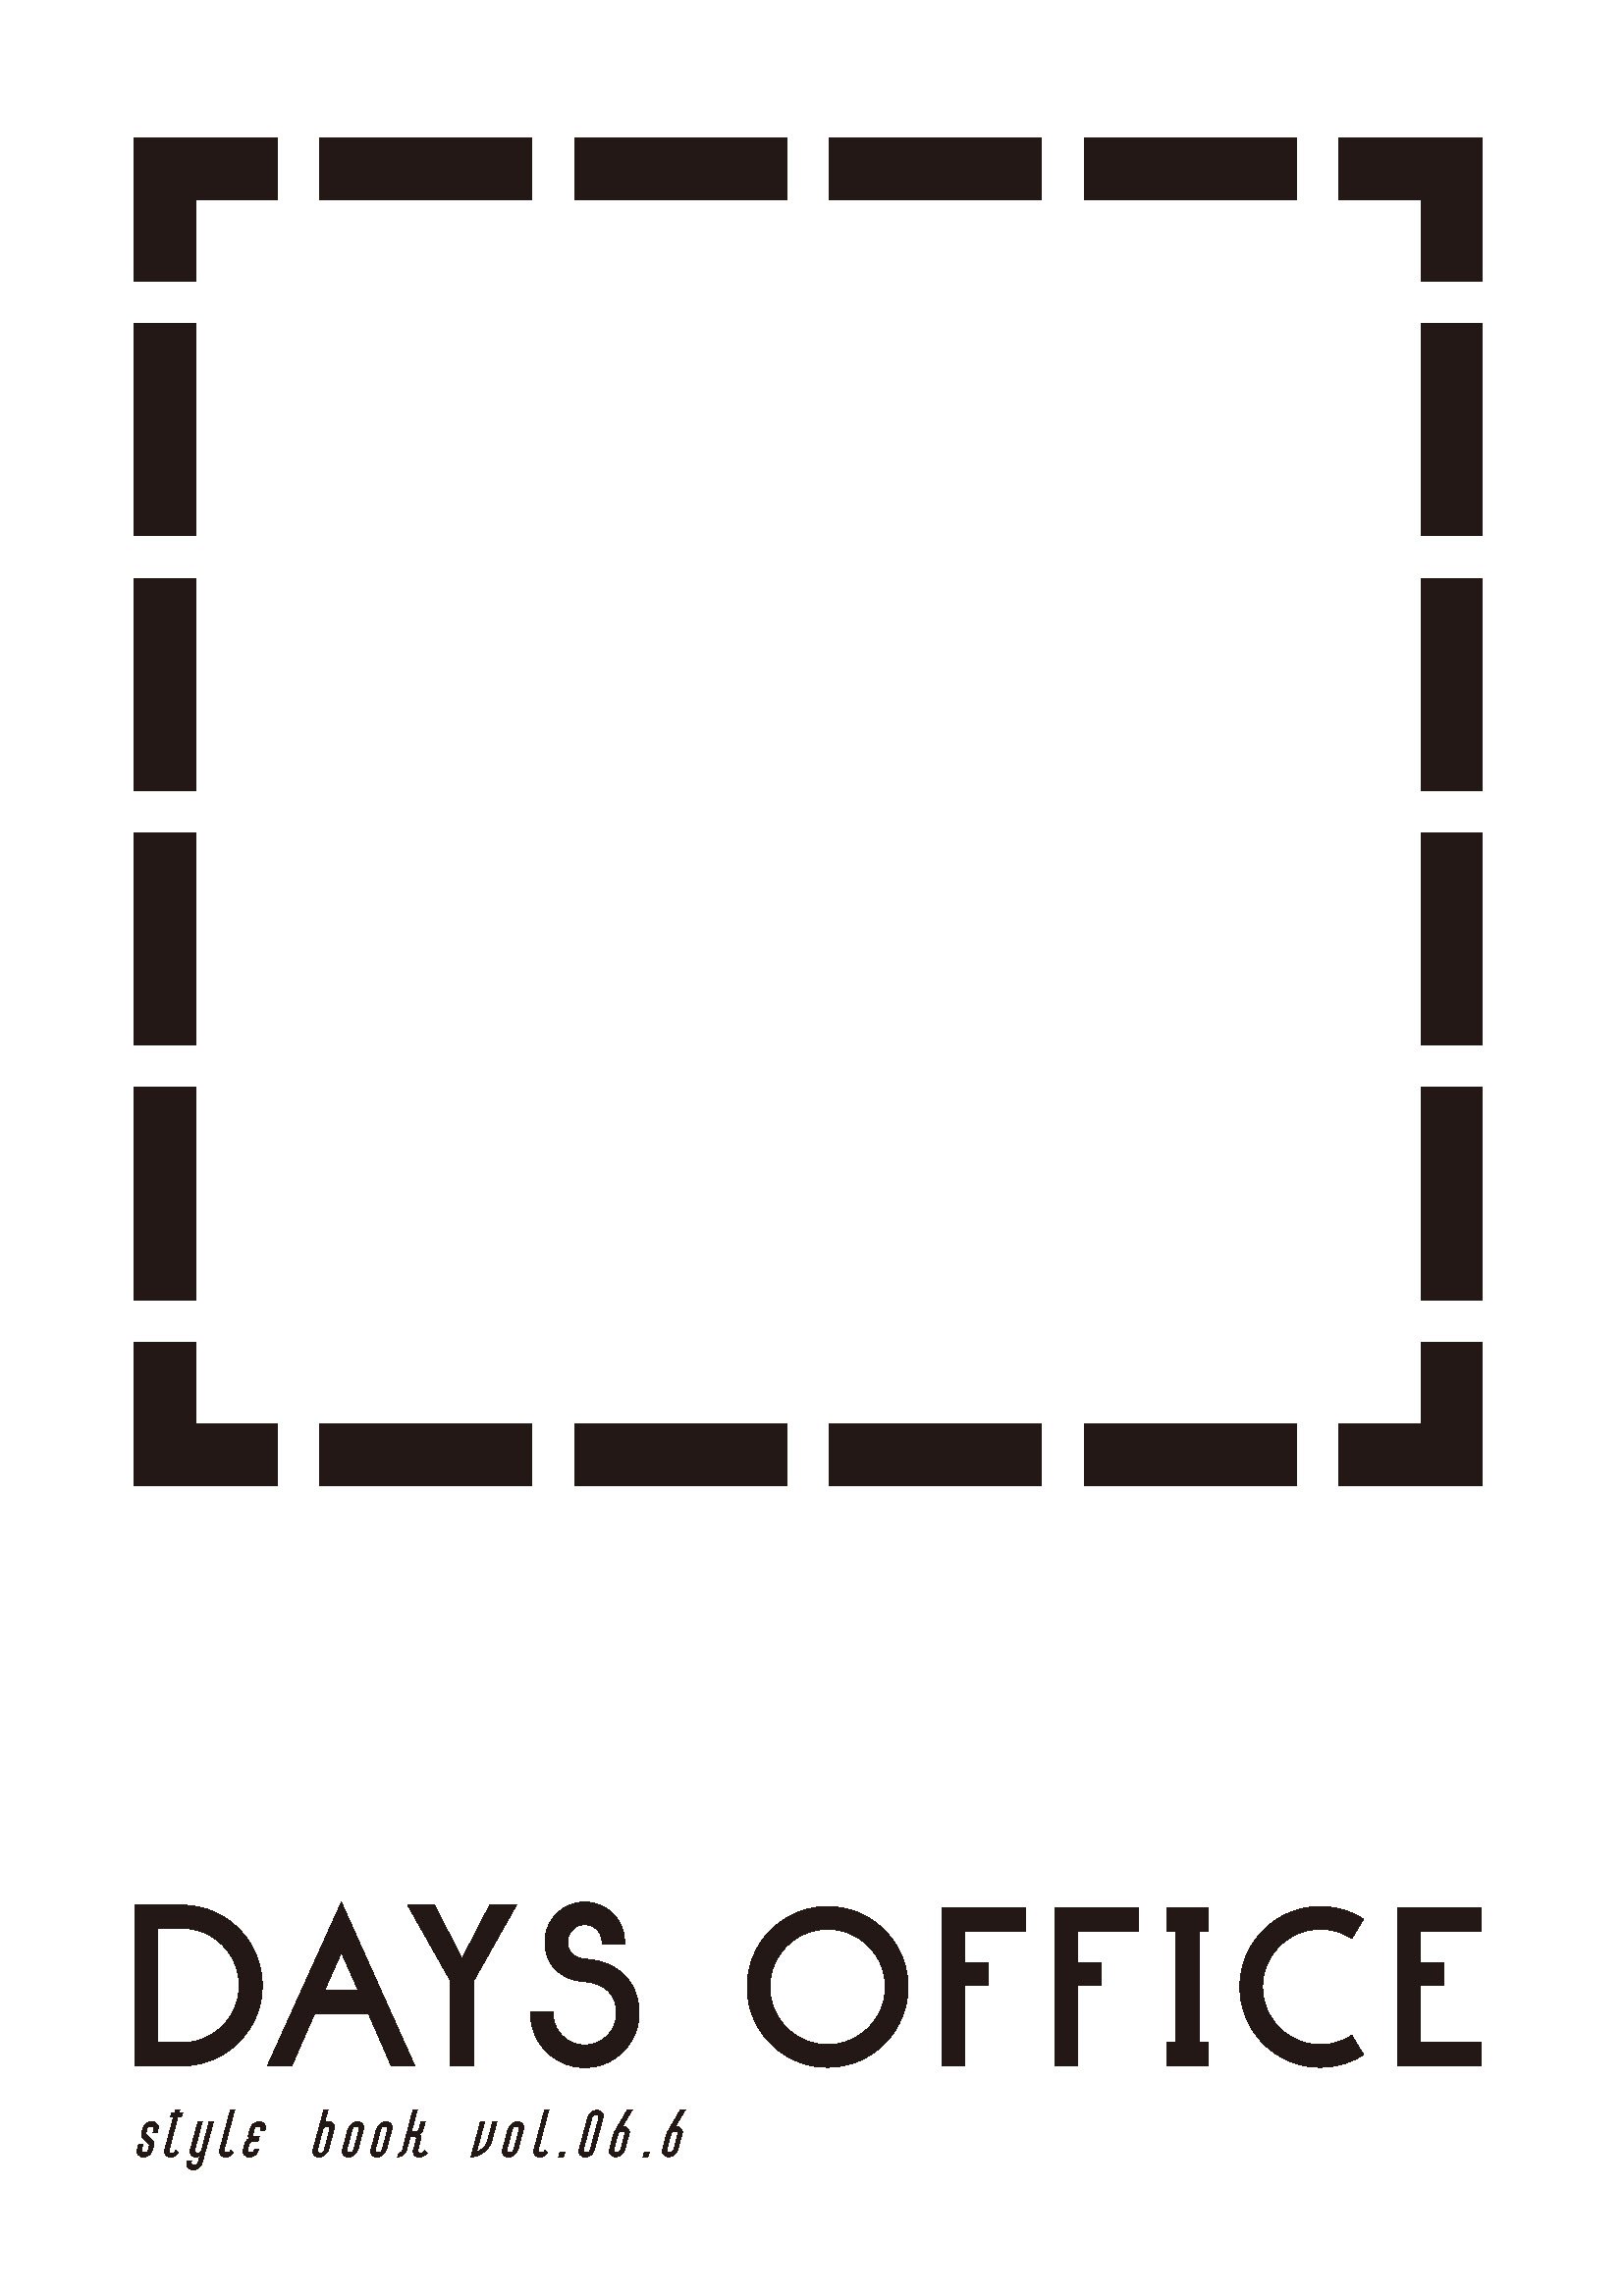 DAYS OFFICE STYLE BOOK Vol.6.5